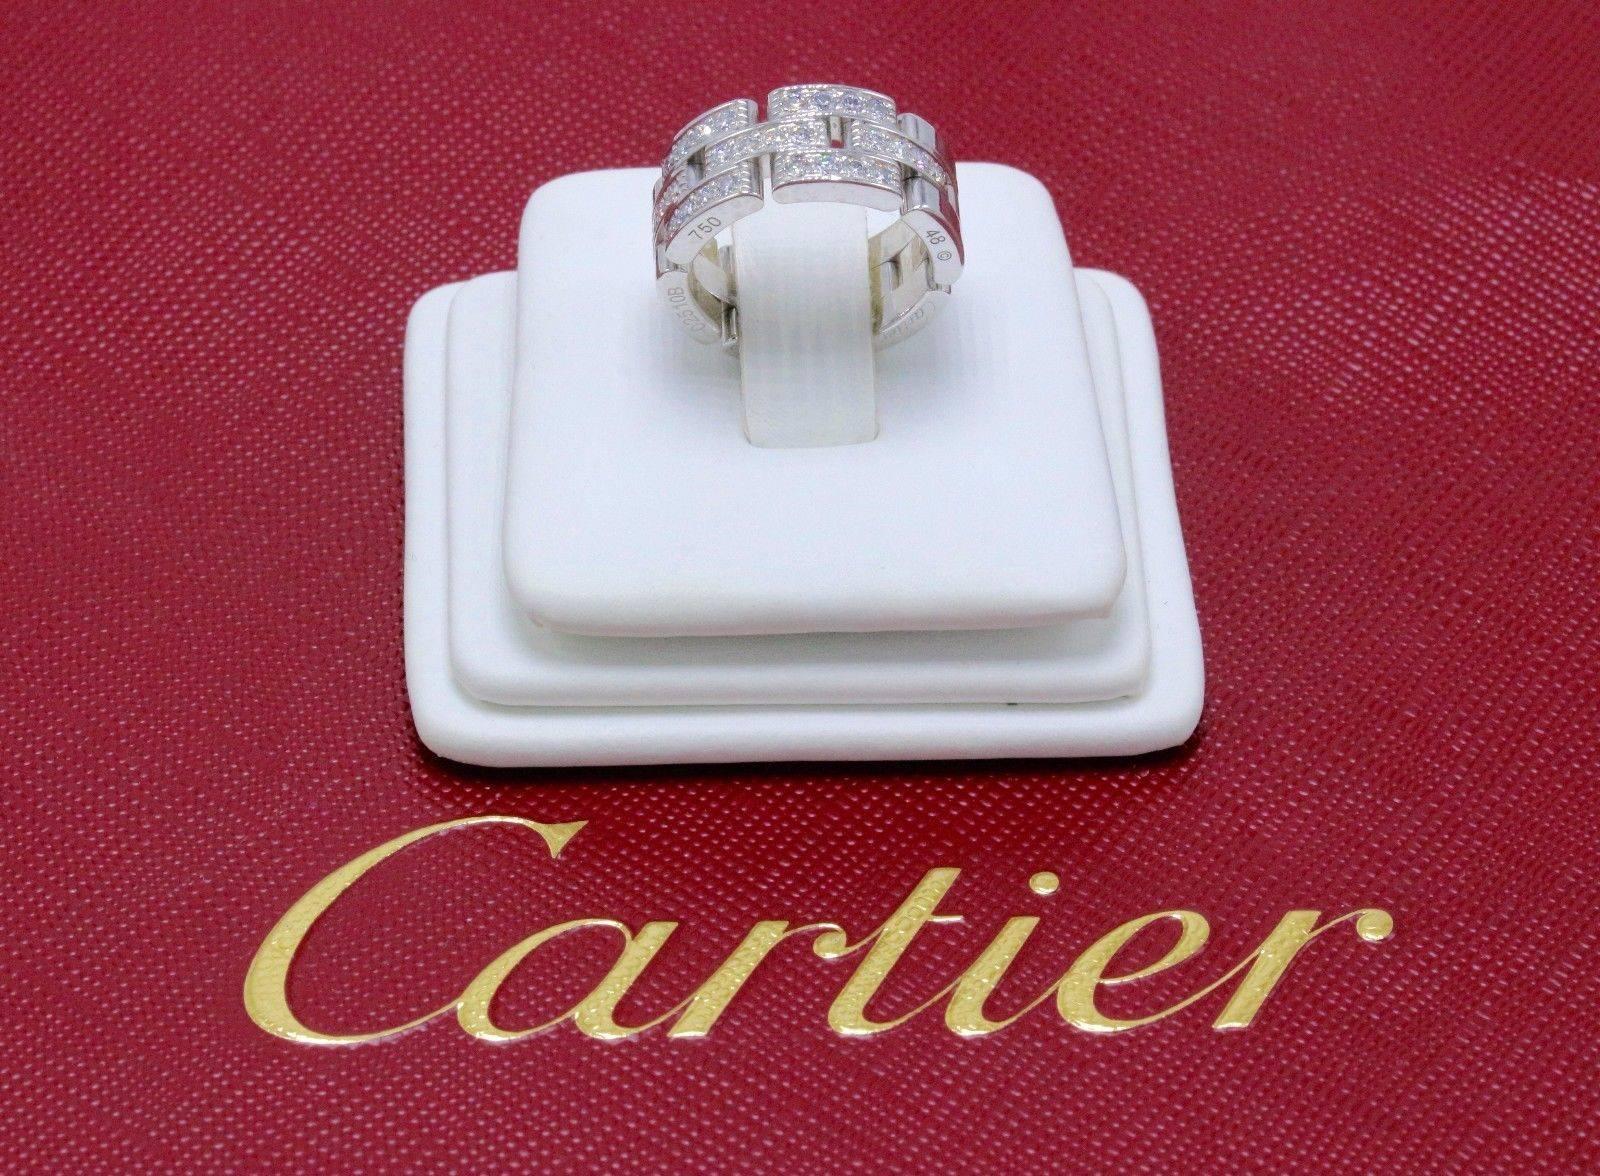 Cartier Maillon Panthere Diamond Wedding Band Ring 18k White Gold Links & Chains For Sale 4